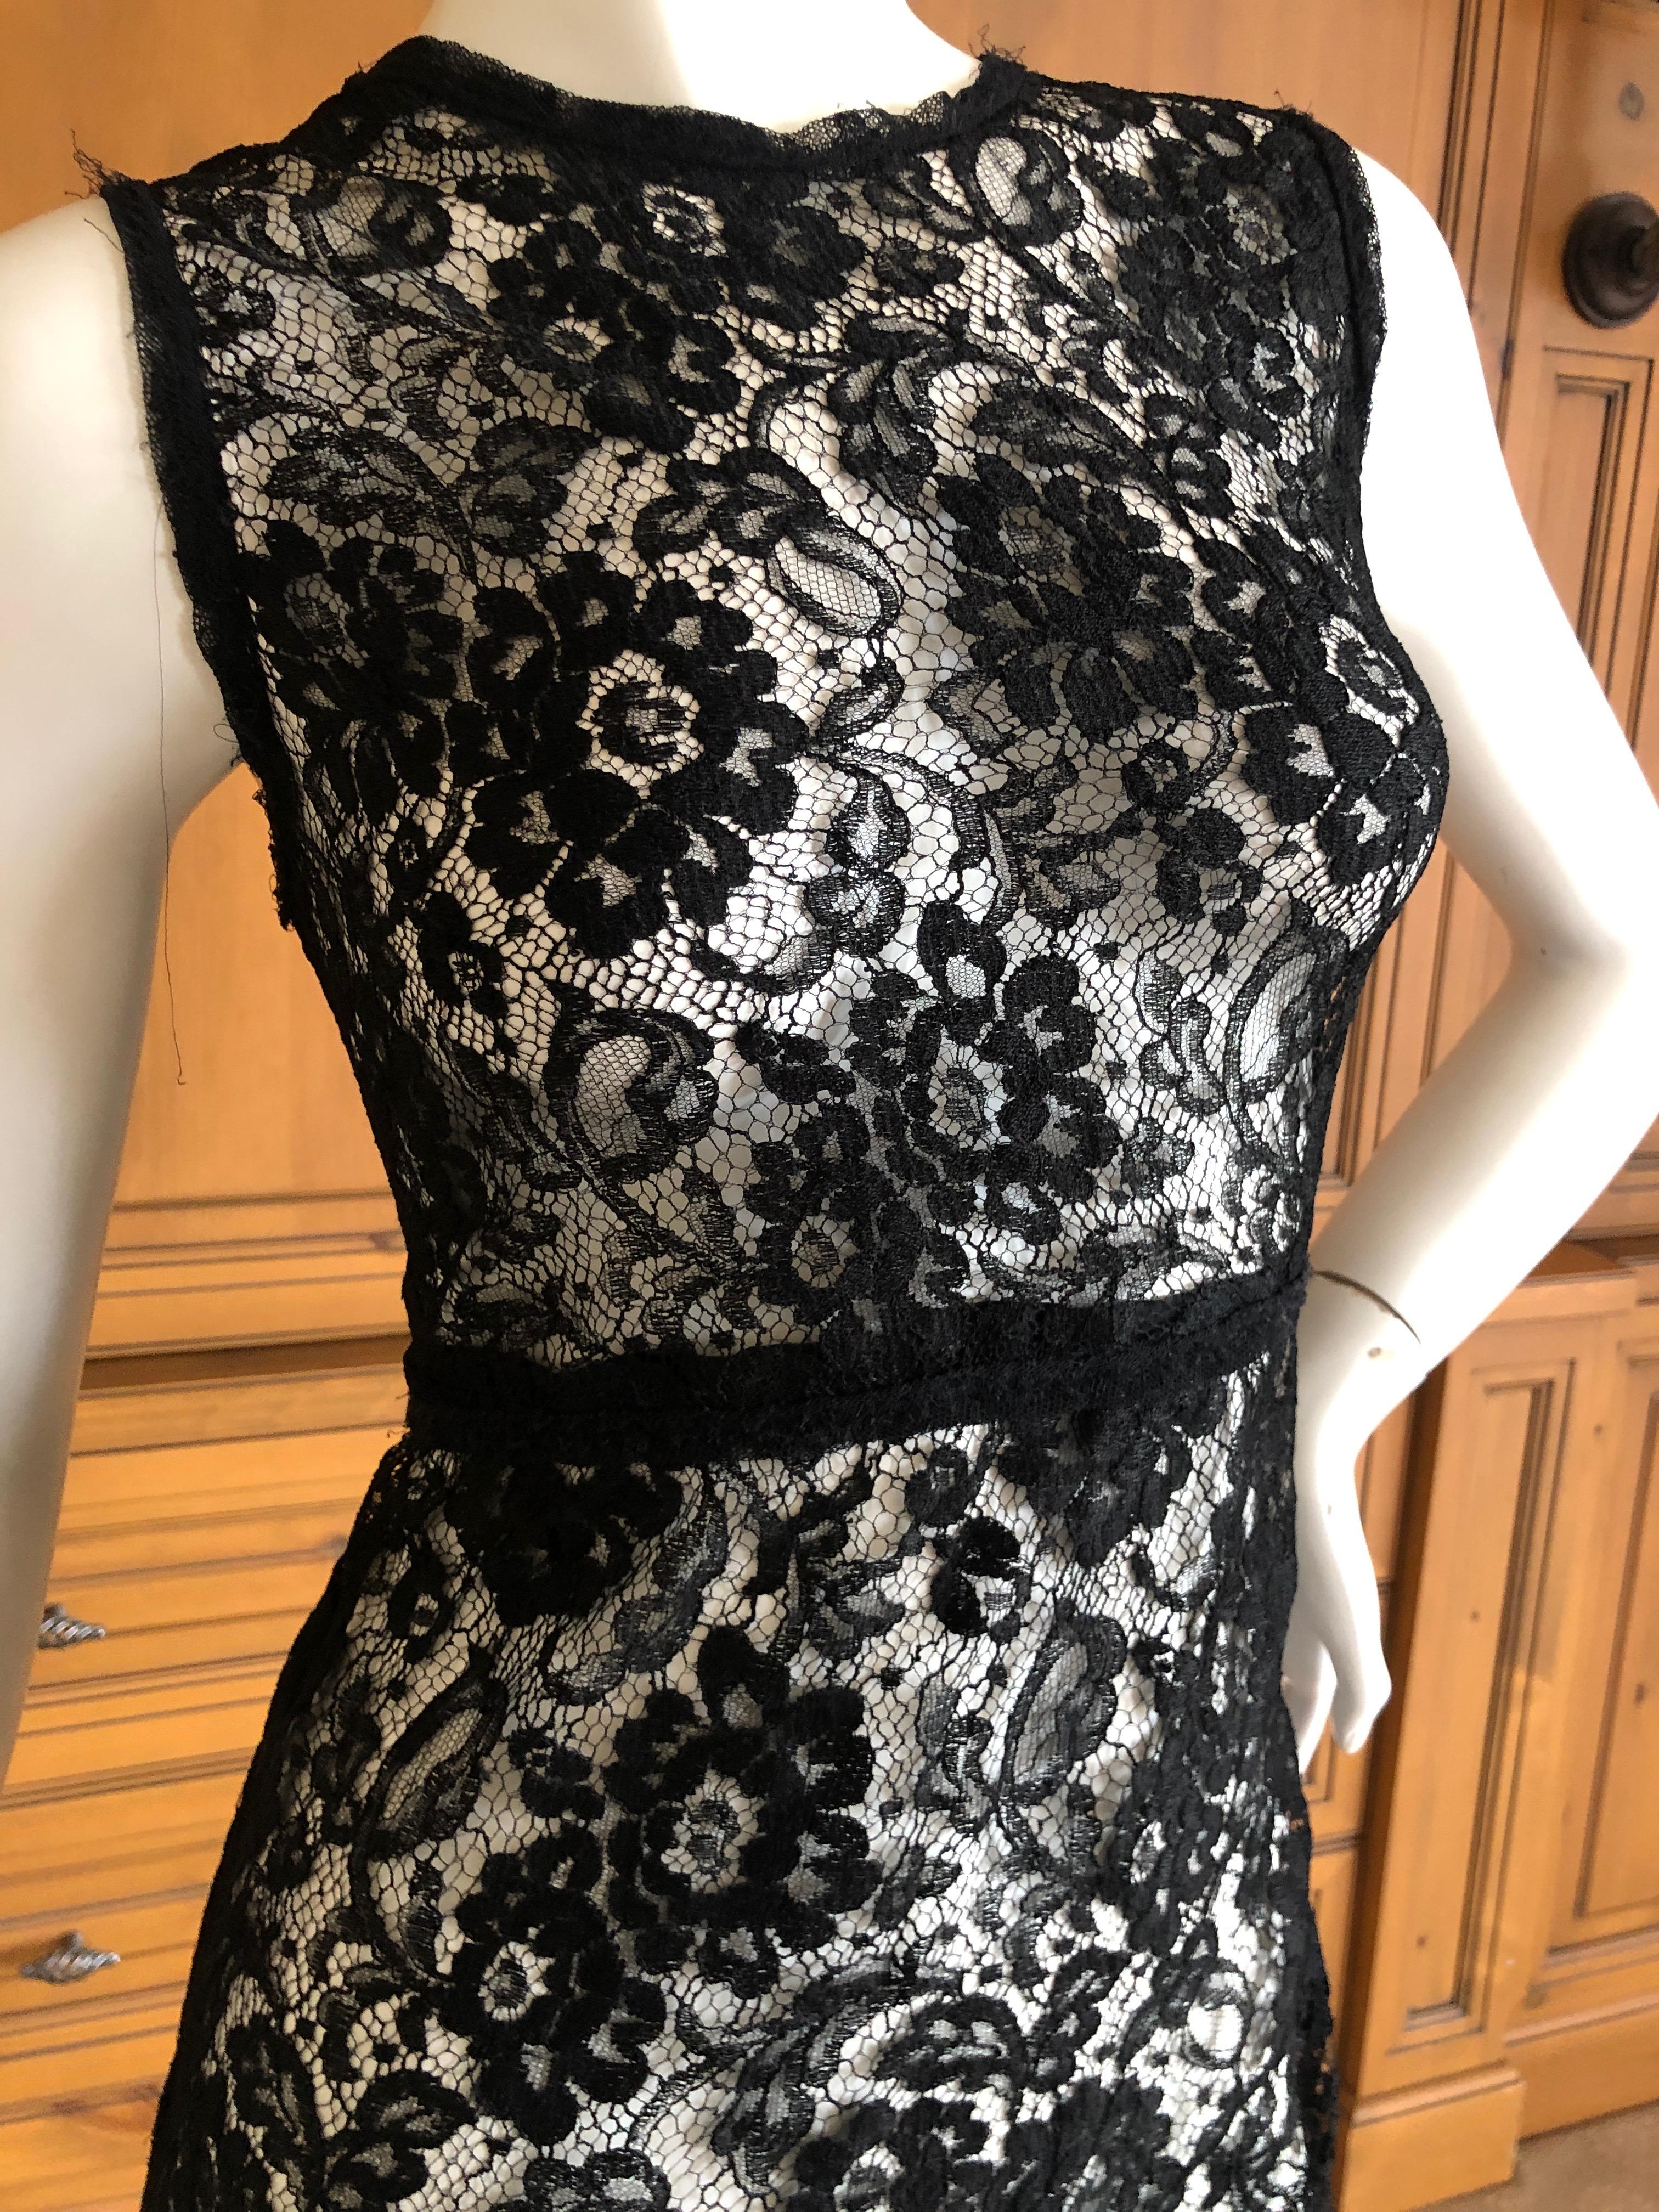 D&G Dolce & Gabbana Vintage Sheer Lace Mini Dress In Excellent Condition For Sale In Cloverdale, CA